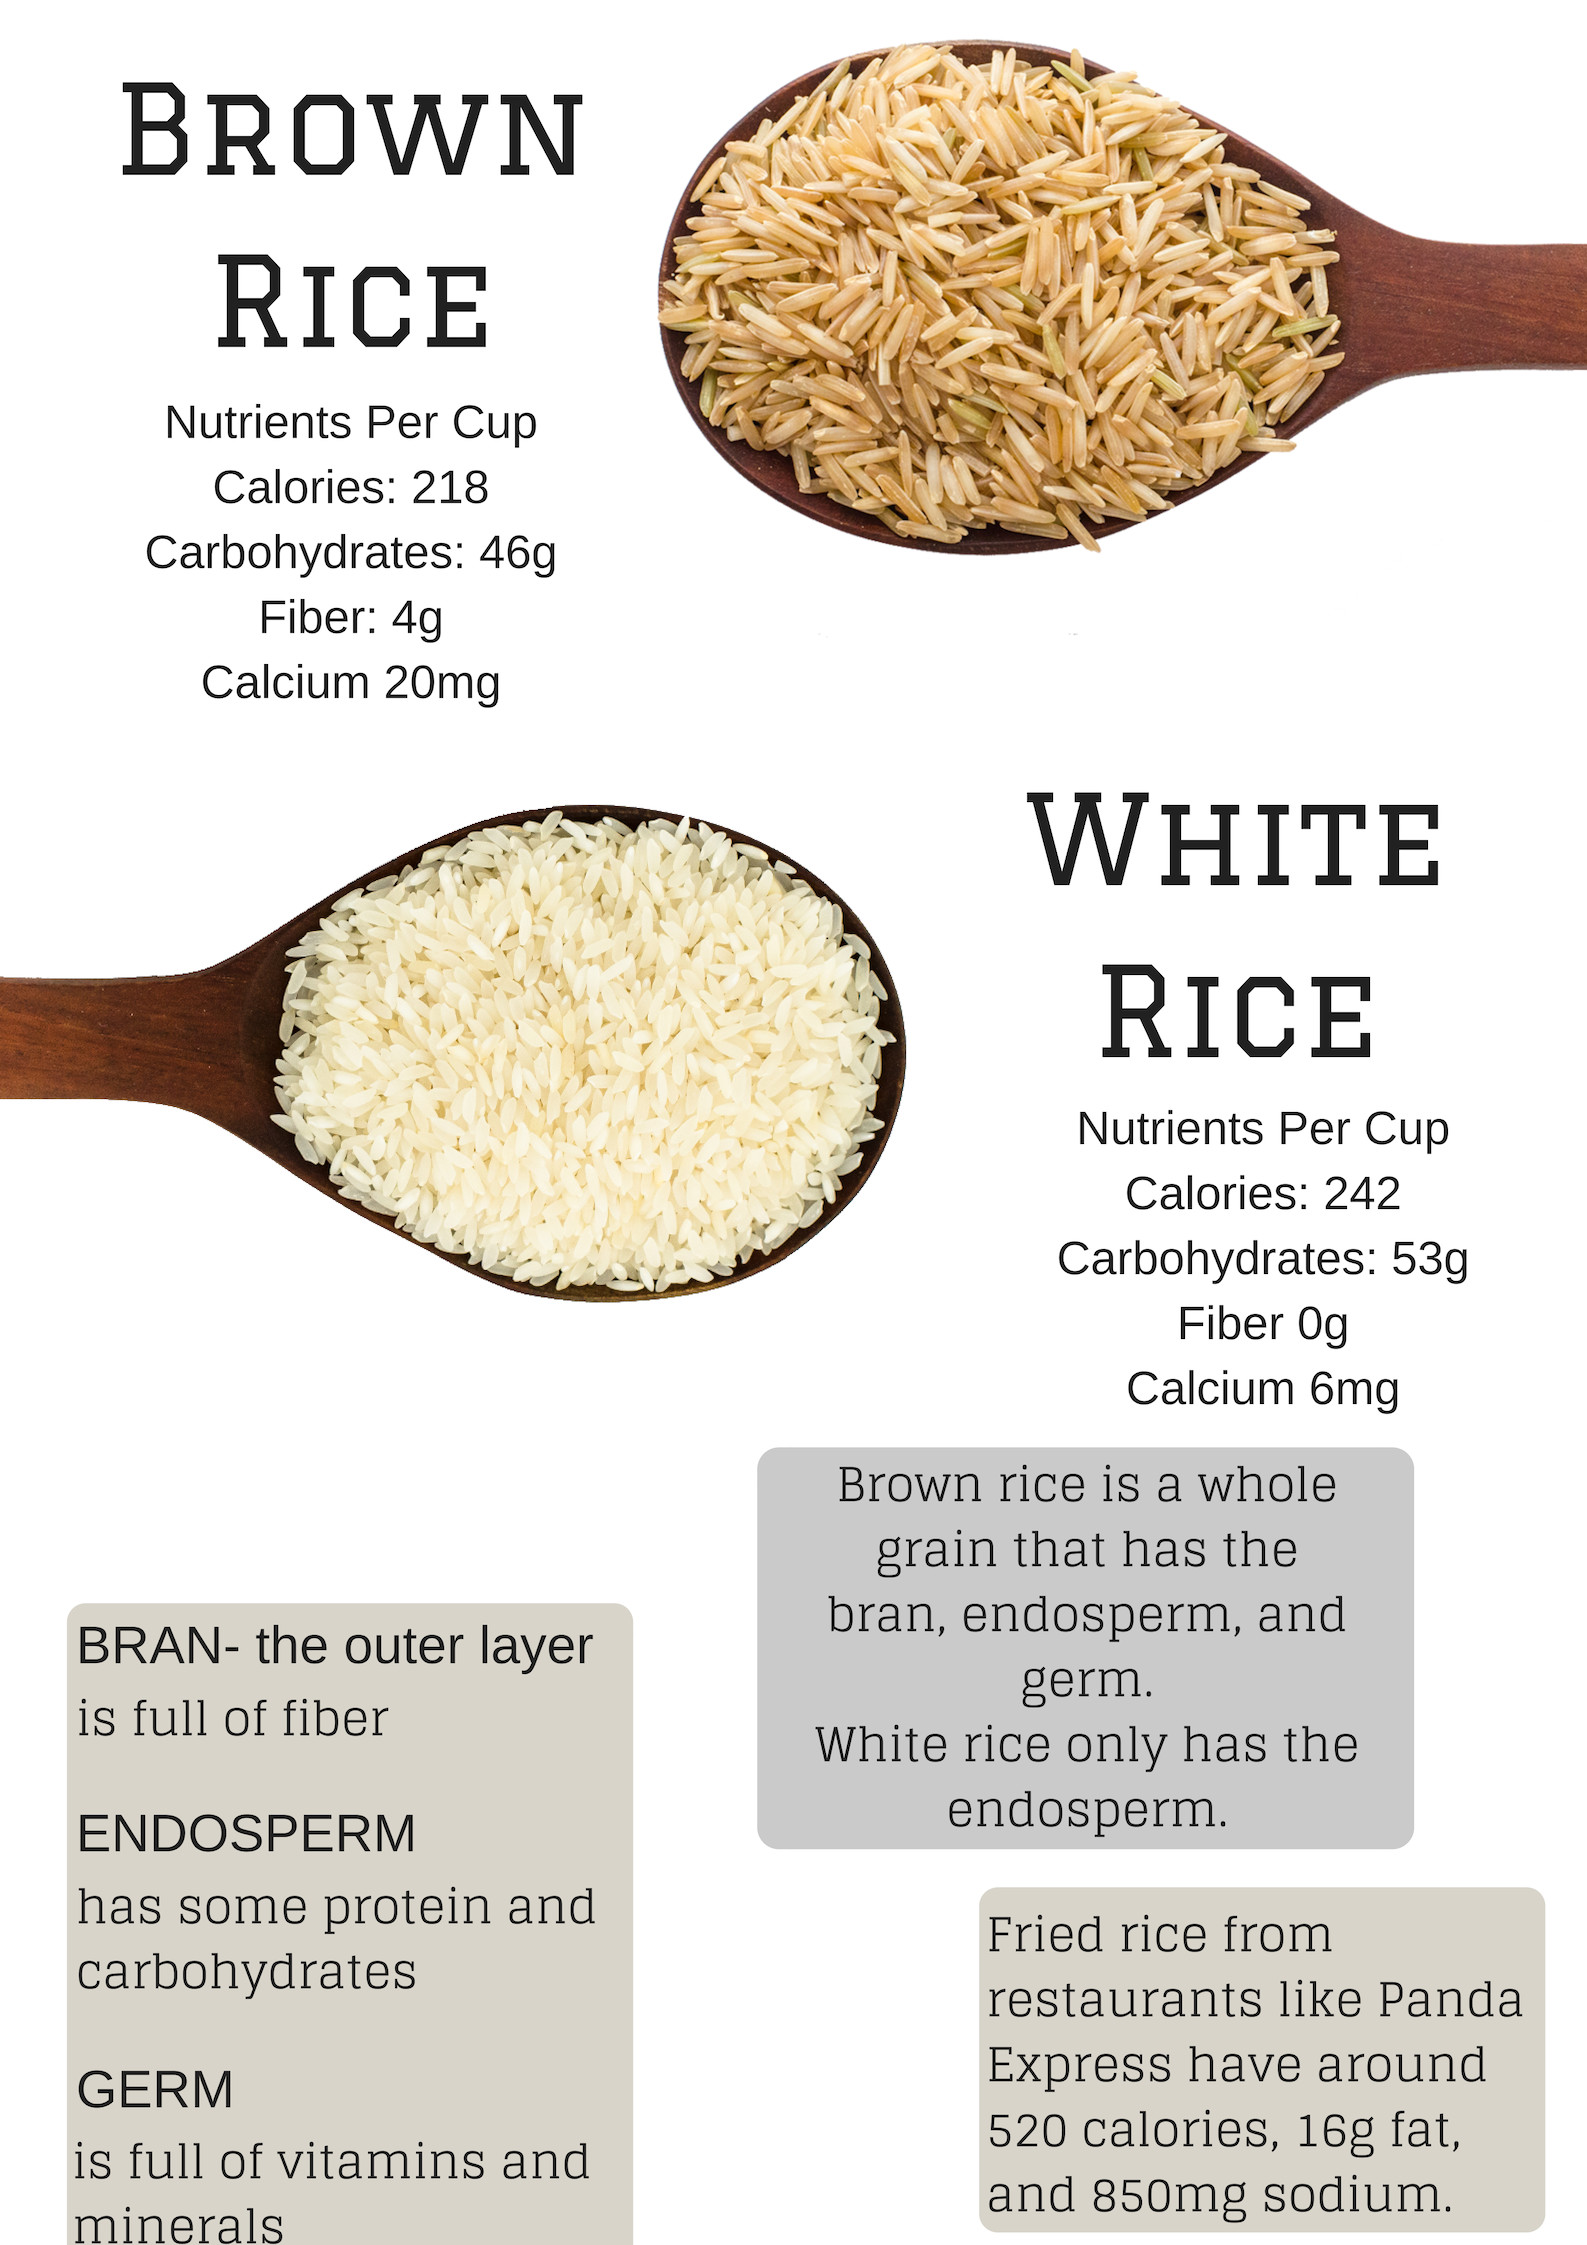 Don’t Miss Our 15 Most Shared Difference Between White and Brown Rice